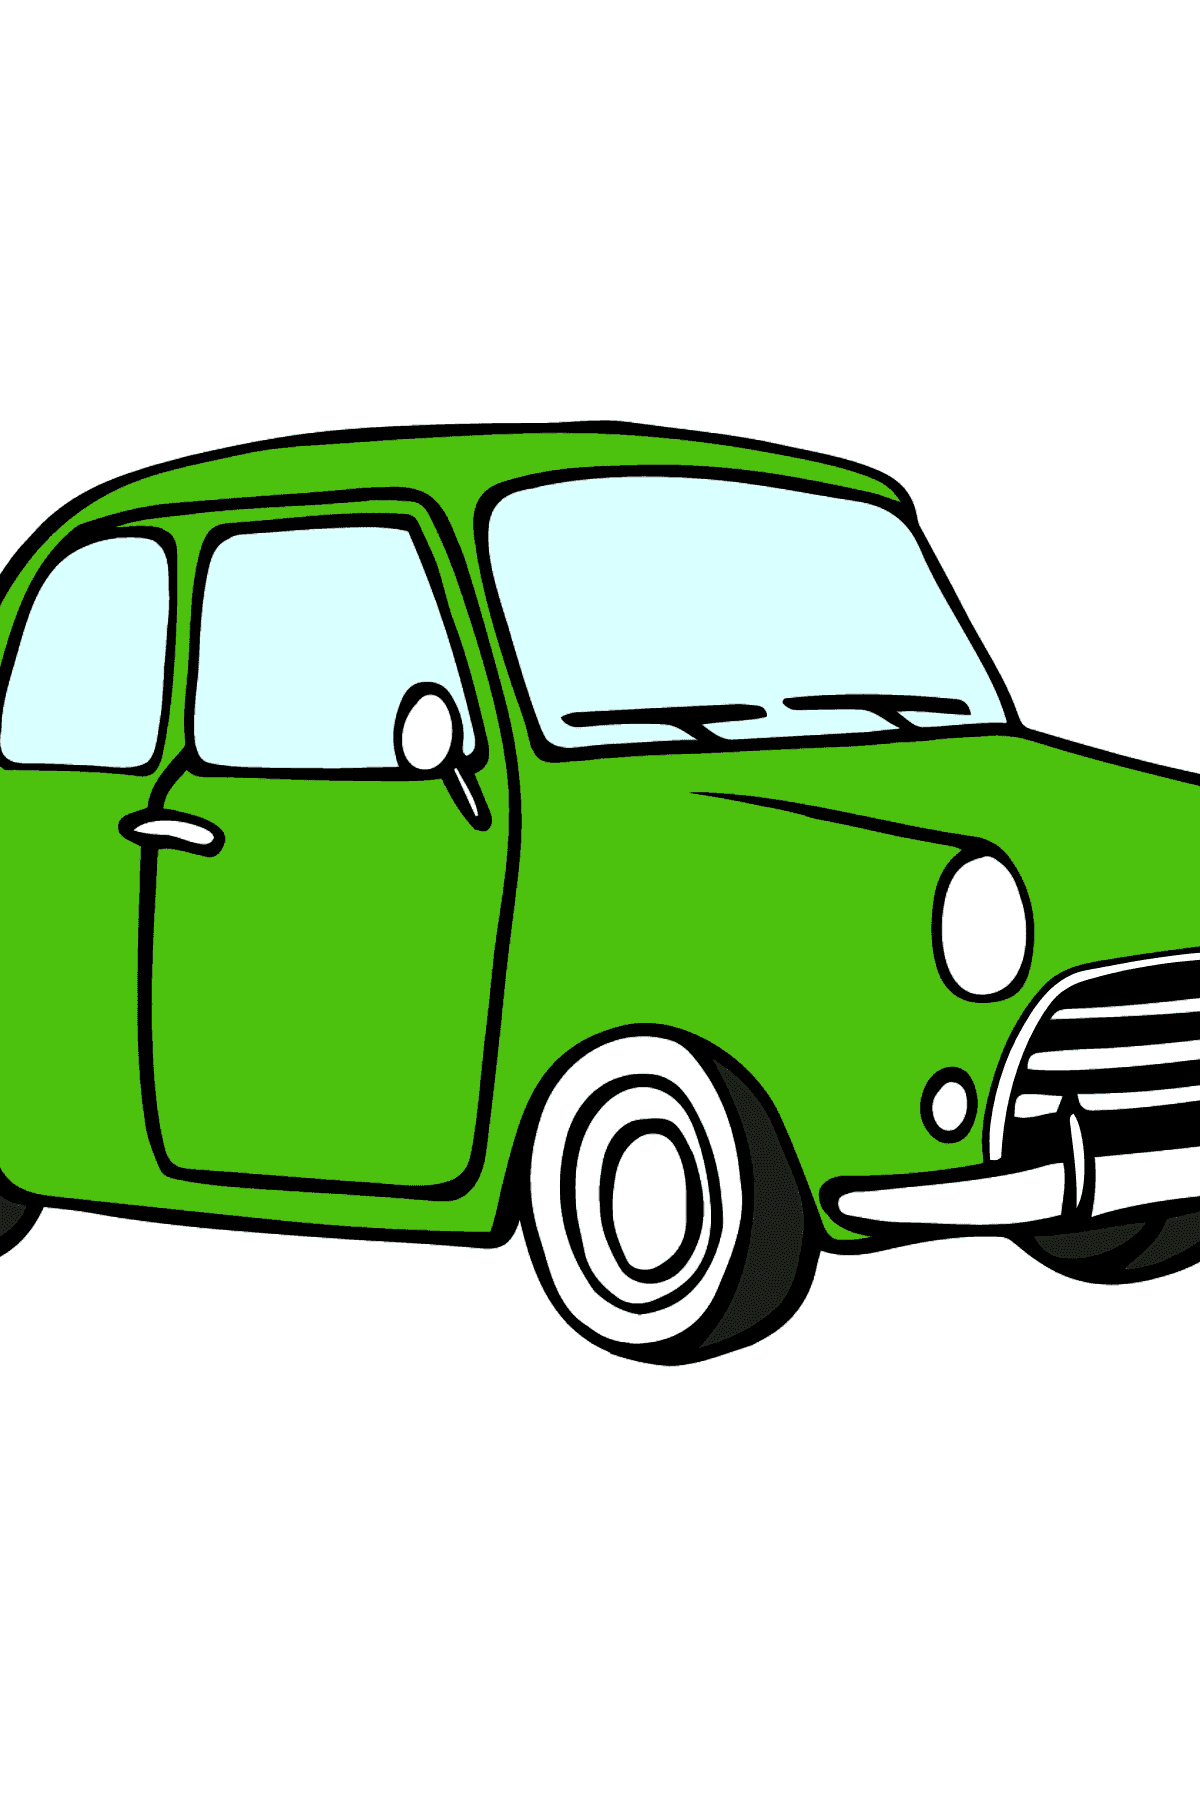 Fiat 600 coloring page (green car) - Coloring Pages for Kids